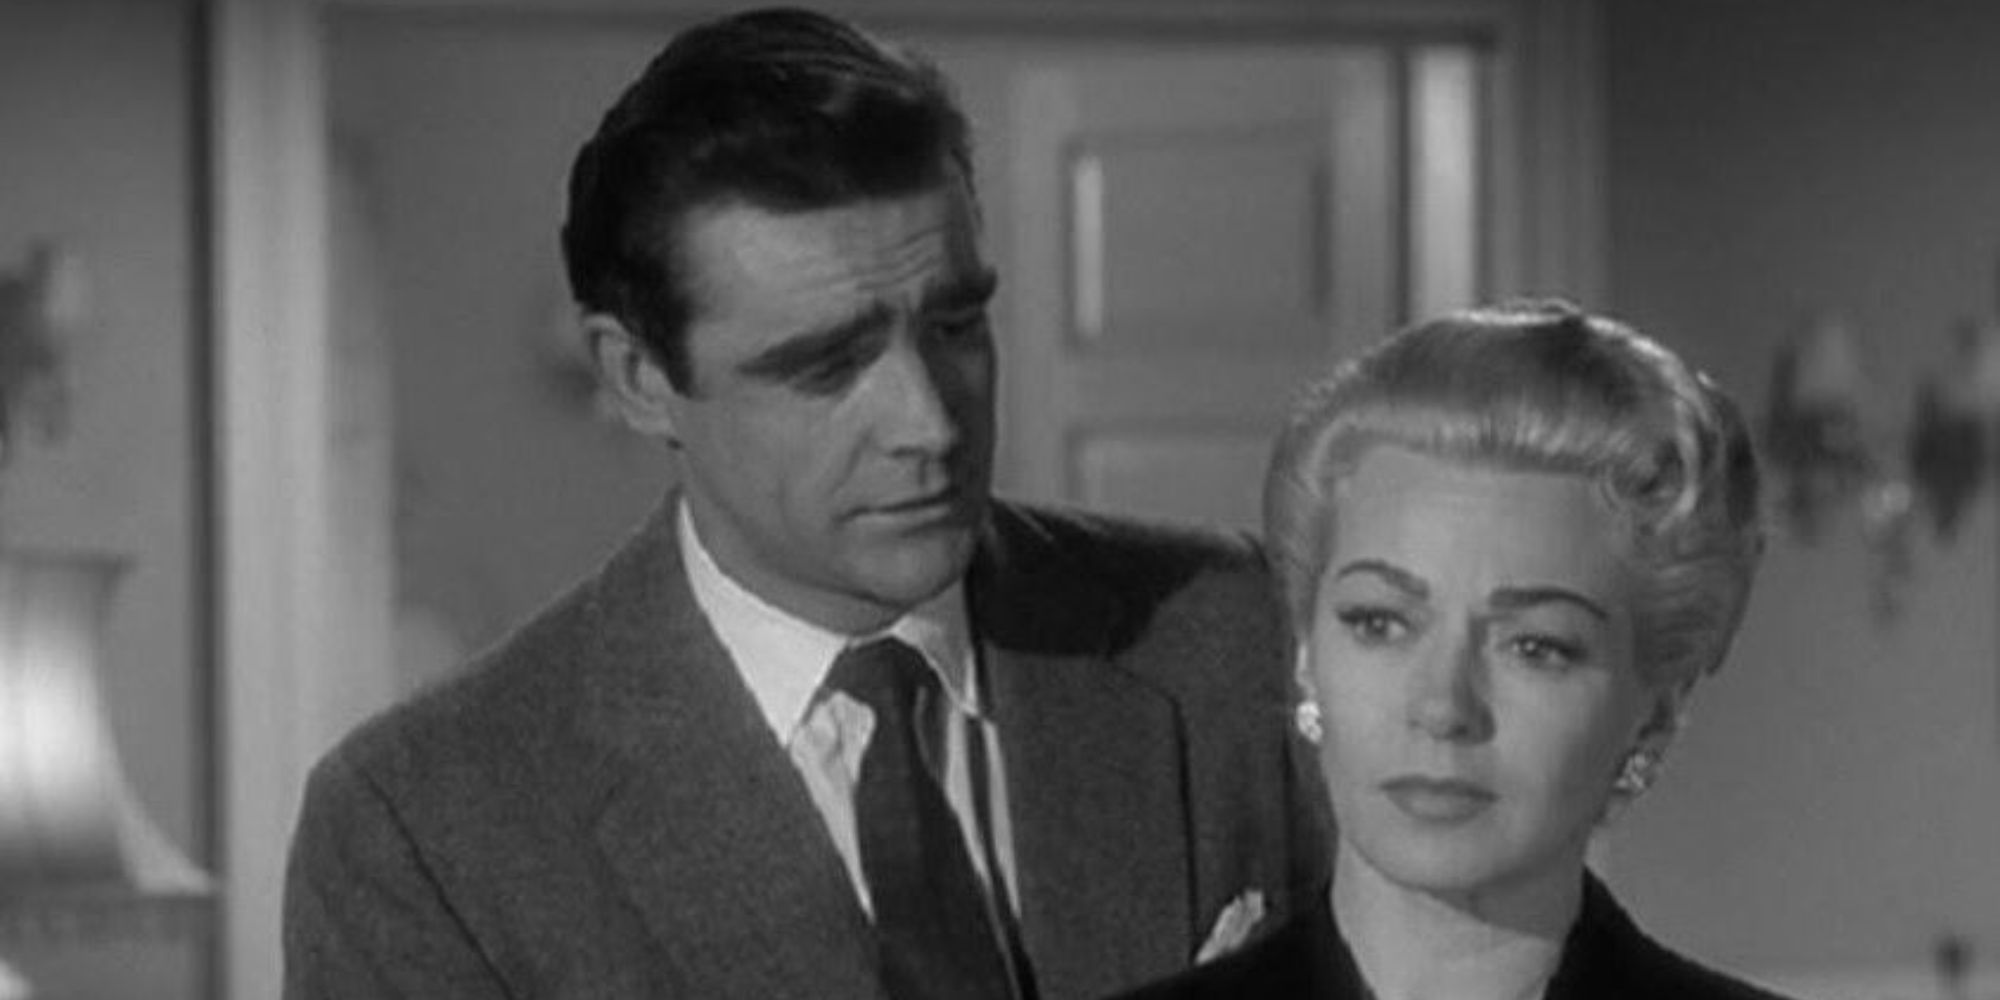 Sir Sean Connery and Lana Turner in 'Another Time, Another Place'